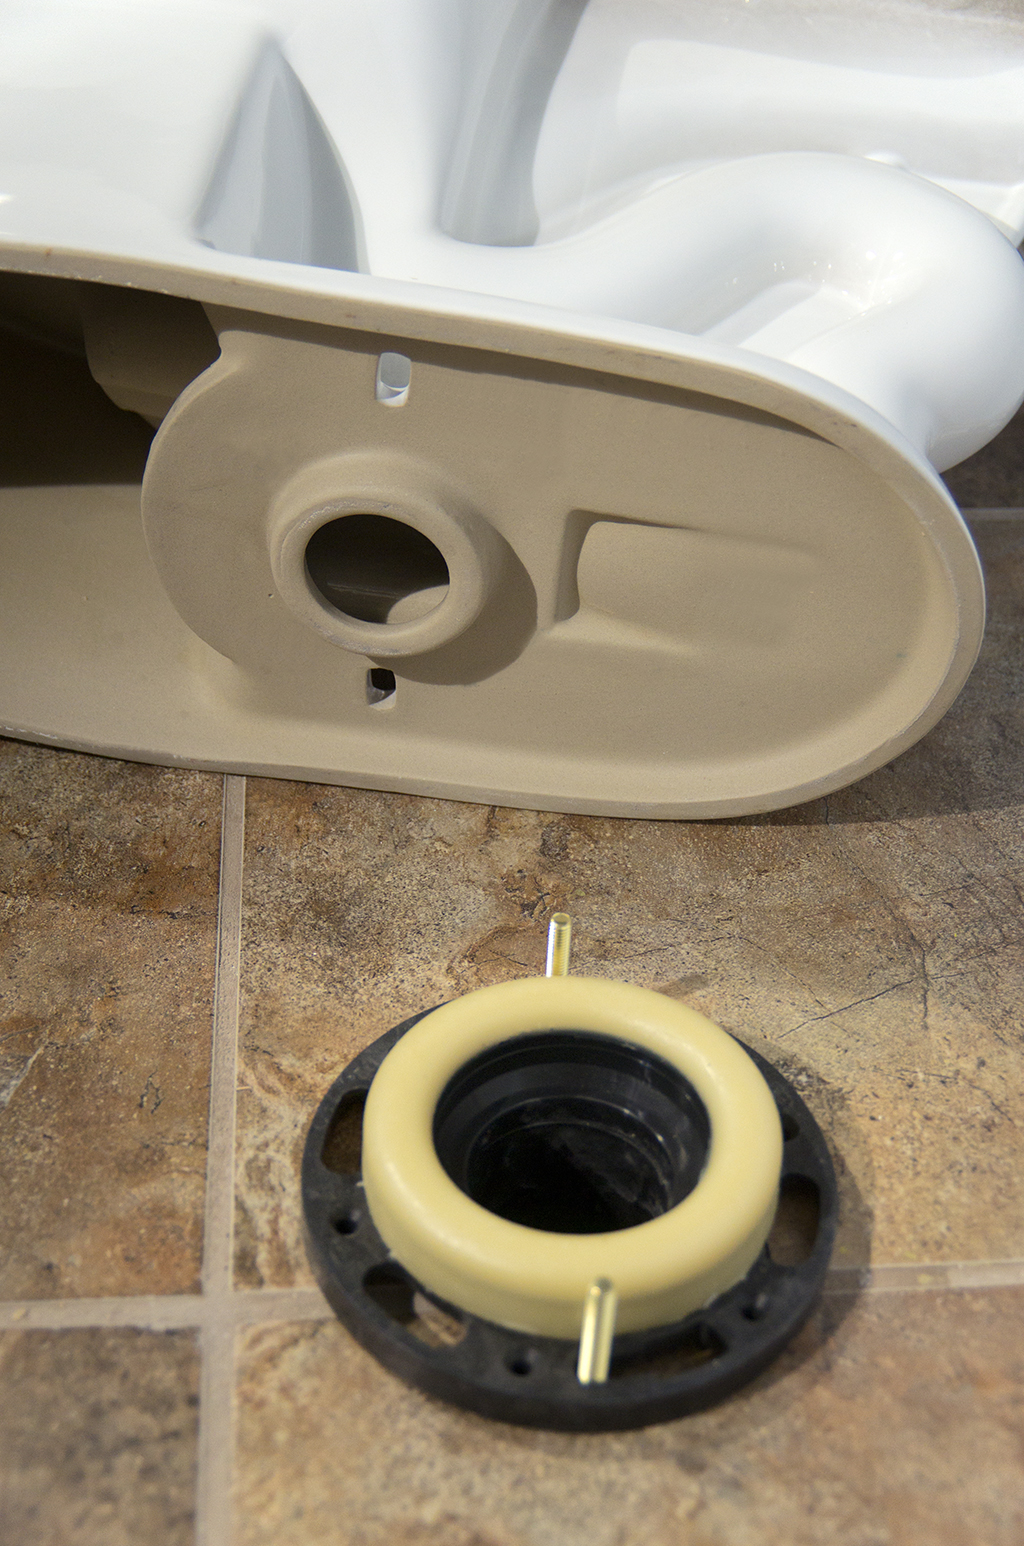 How To Know When Your Toilet Needs To Be Replaced - Plumbing